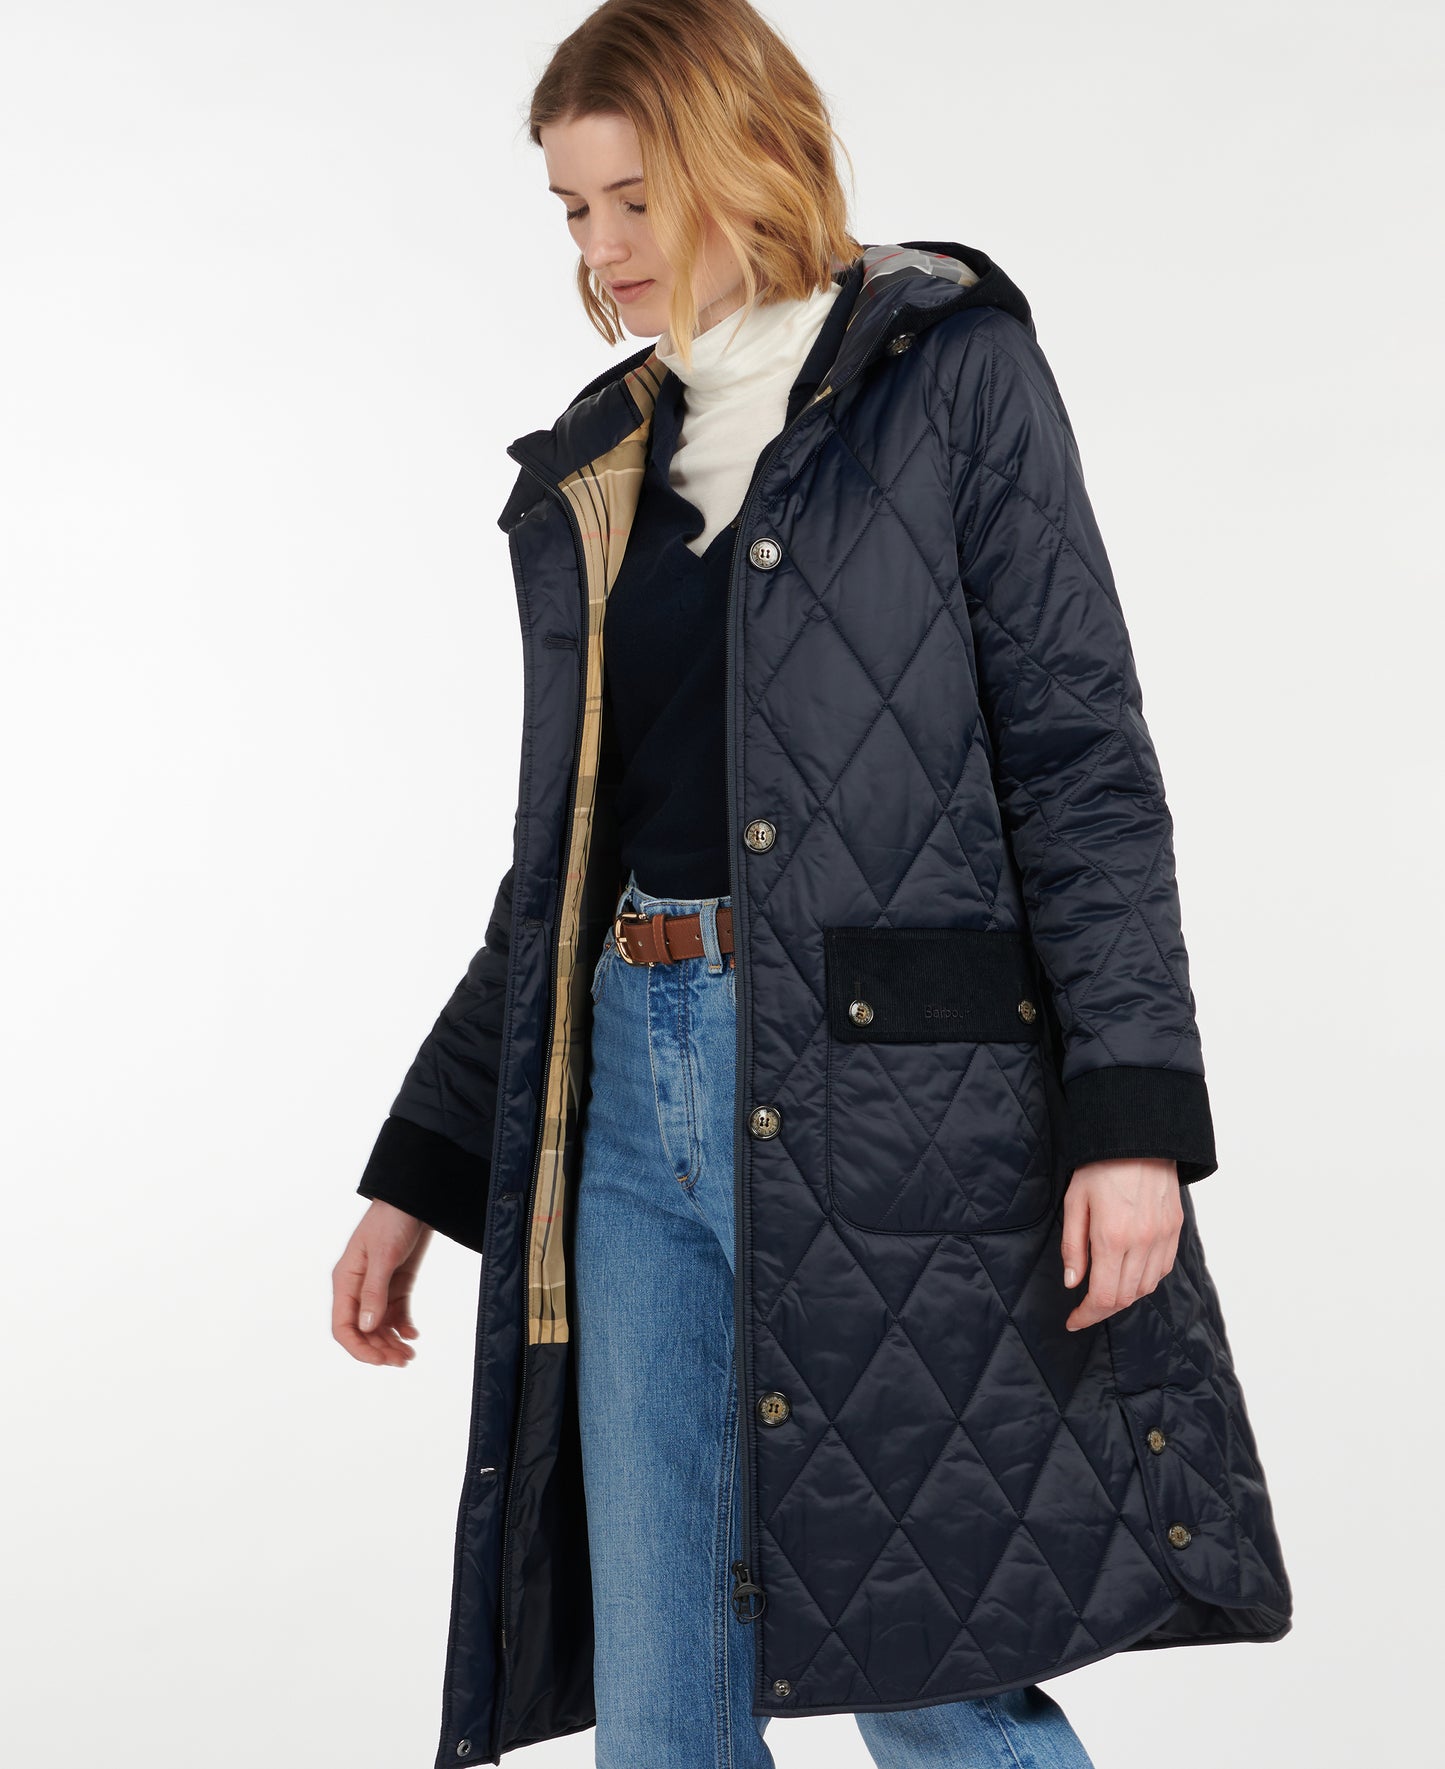 Barbour Mickley Quilted Jacket